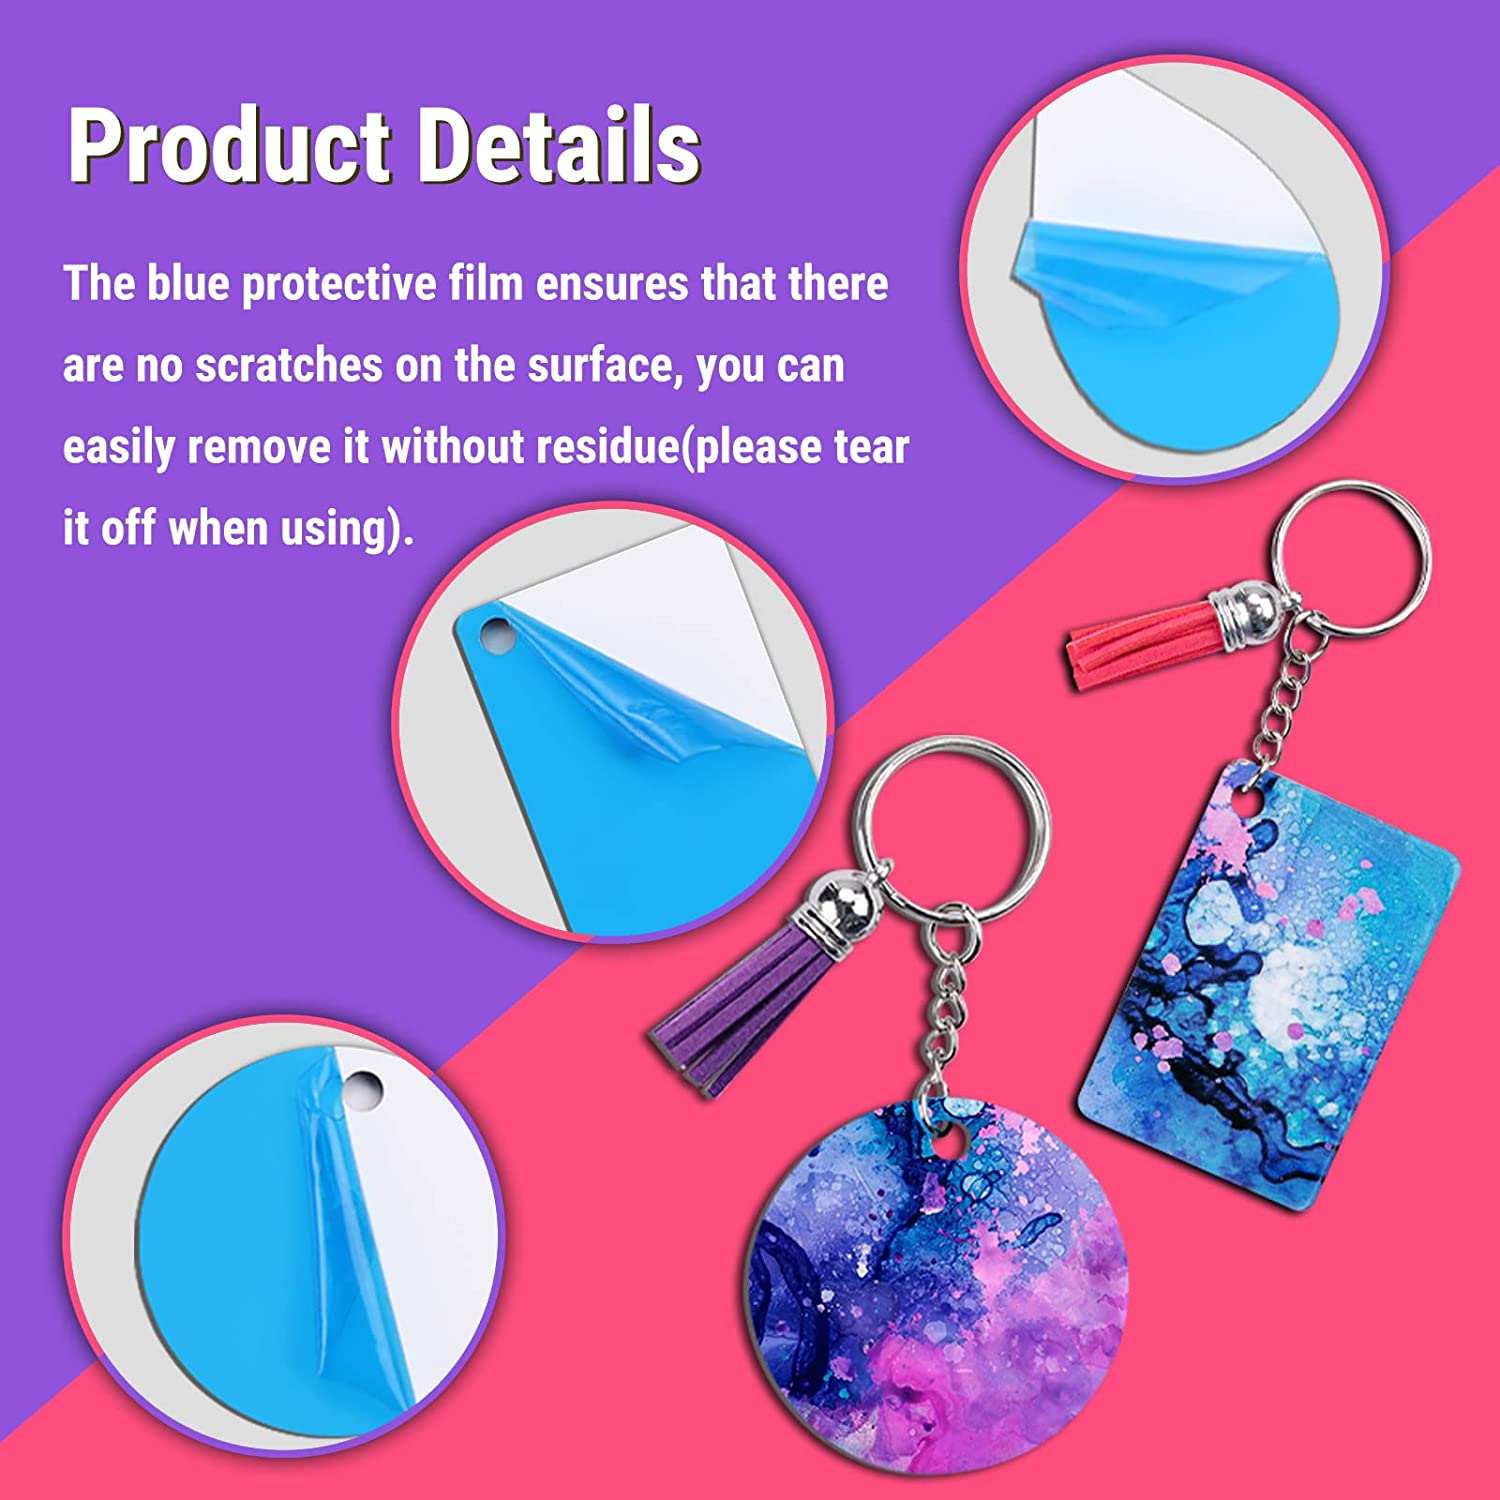 42Pcs Mixed Sublimation Blanks - earrings, keychains, mouse pads, coasters BulkCrafting Blanks